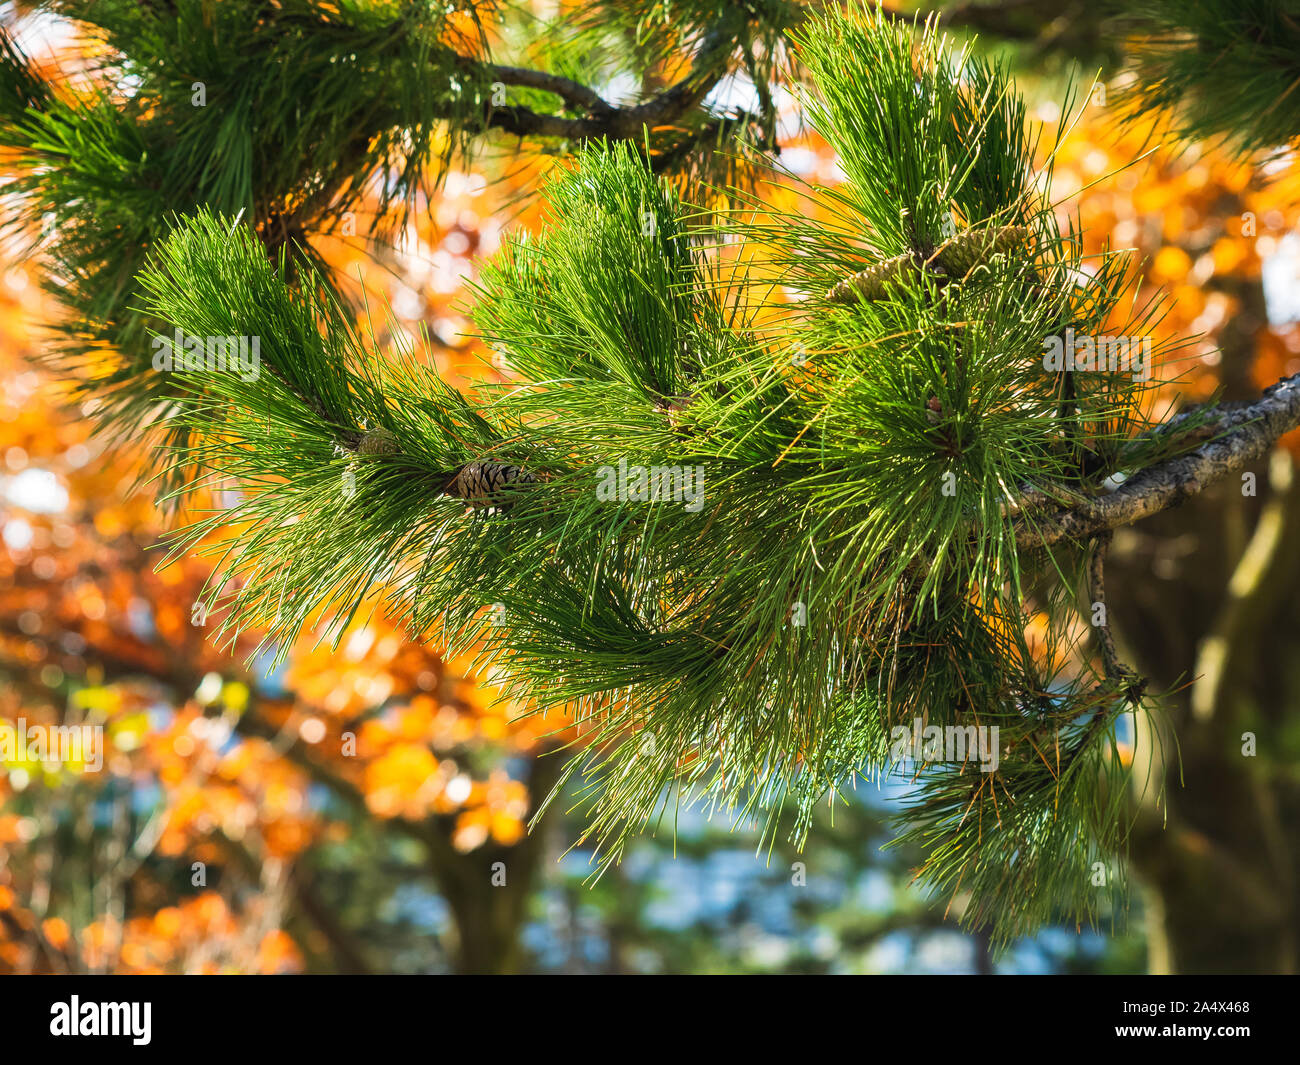 Pine branch on a sunny day pointing upwards and a tree with orange leaves in background blur. Stock Photo